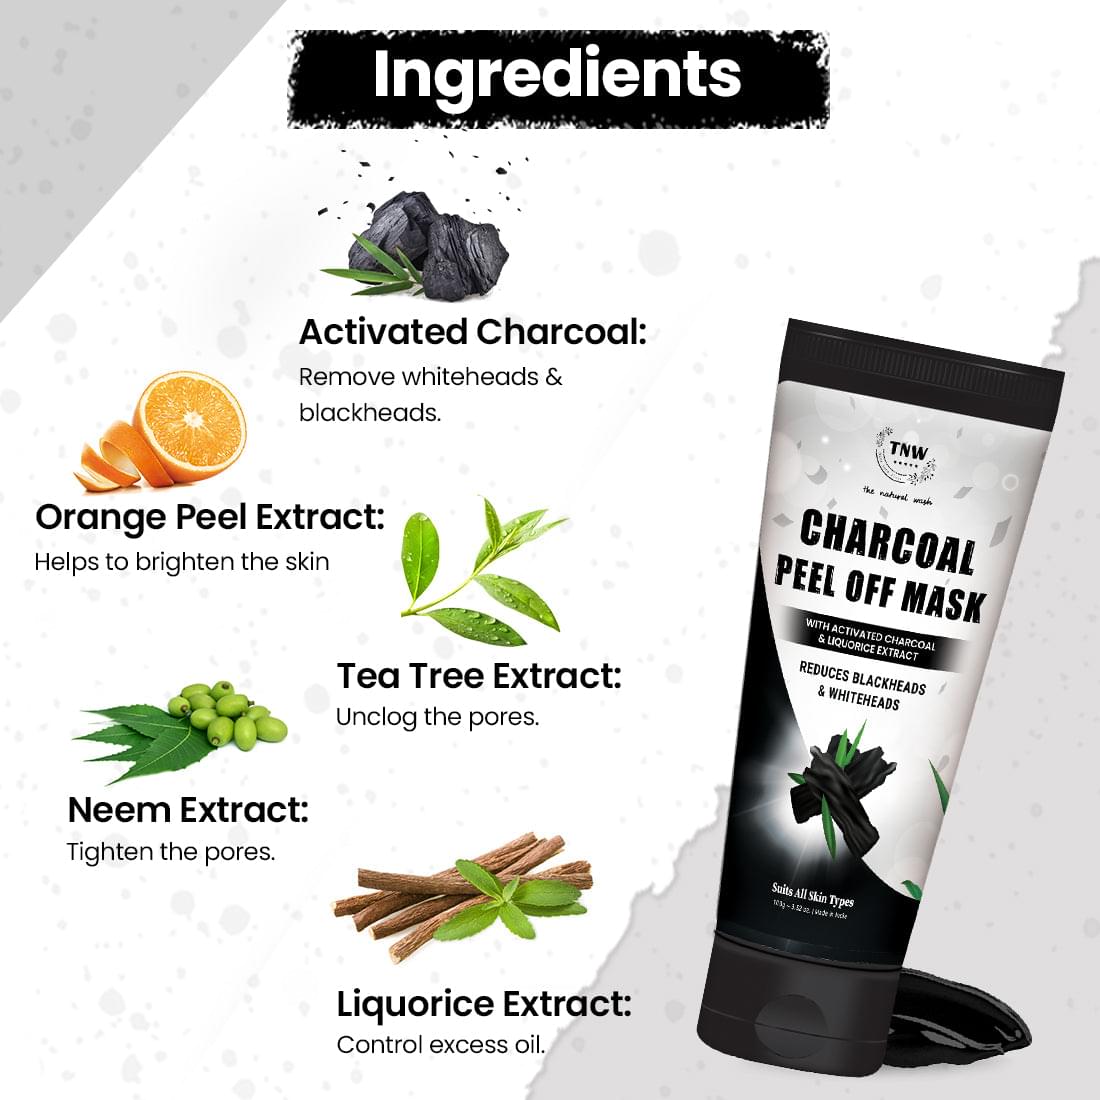 Charcoal Peel Off Mask for Blackheads and Removes Tan